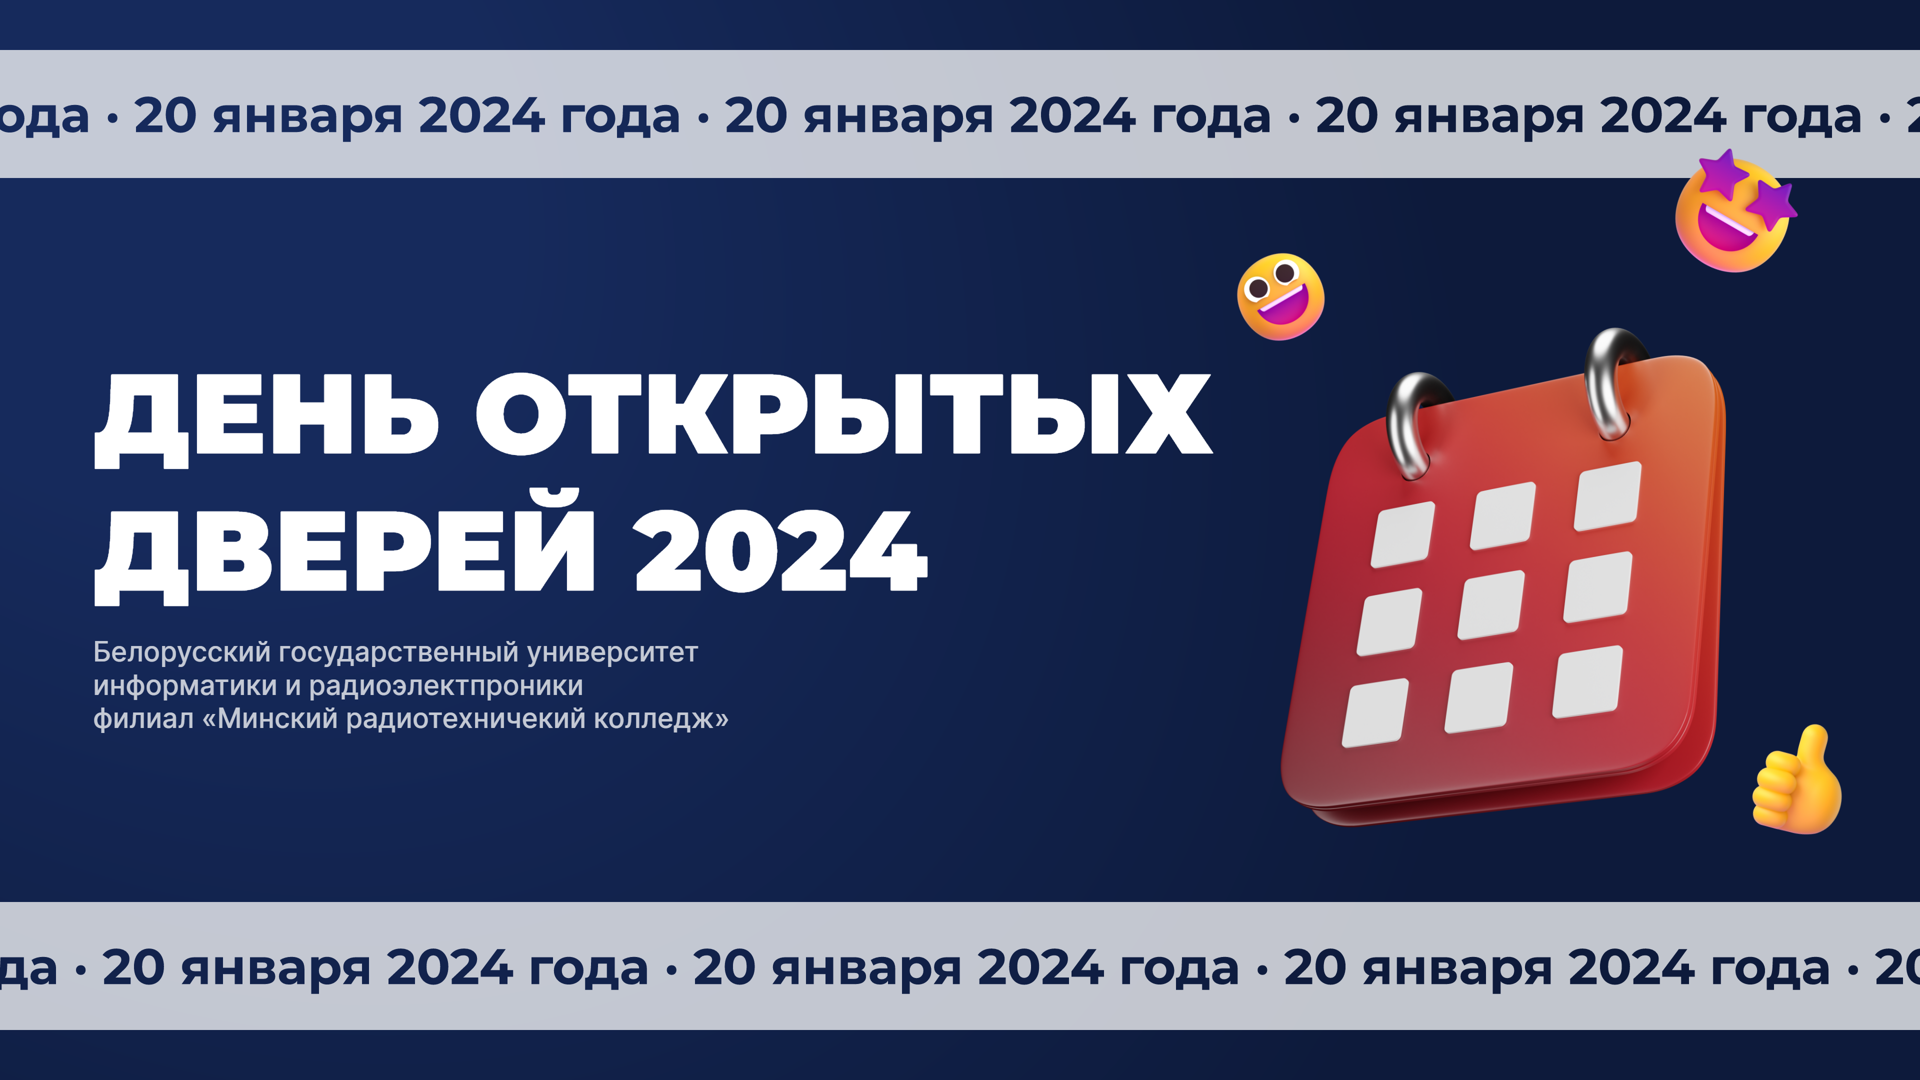 Open Day 01/20/2024!